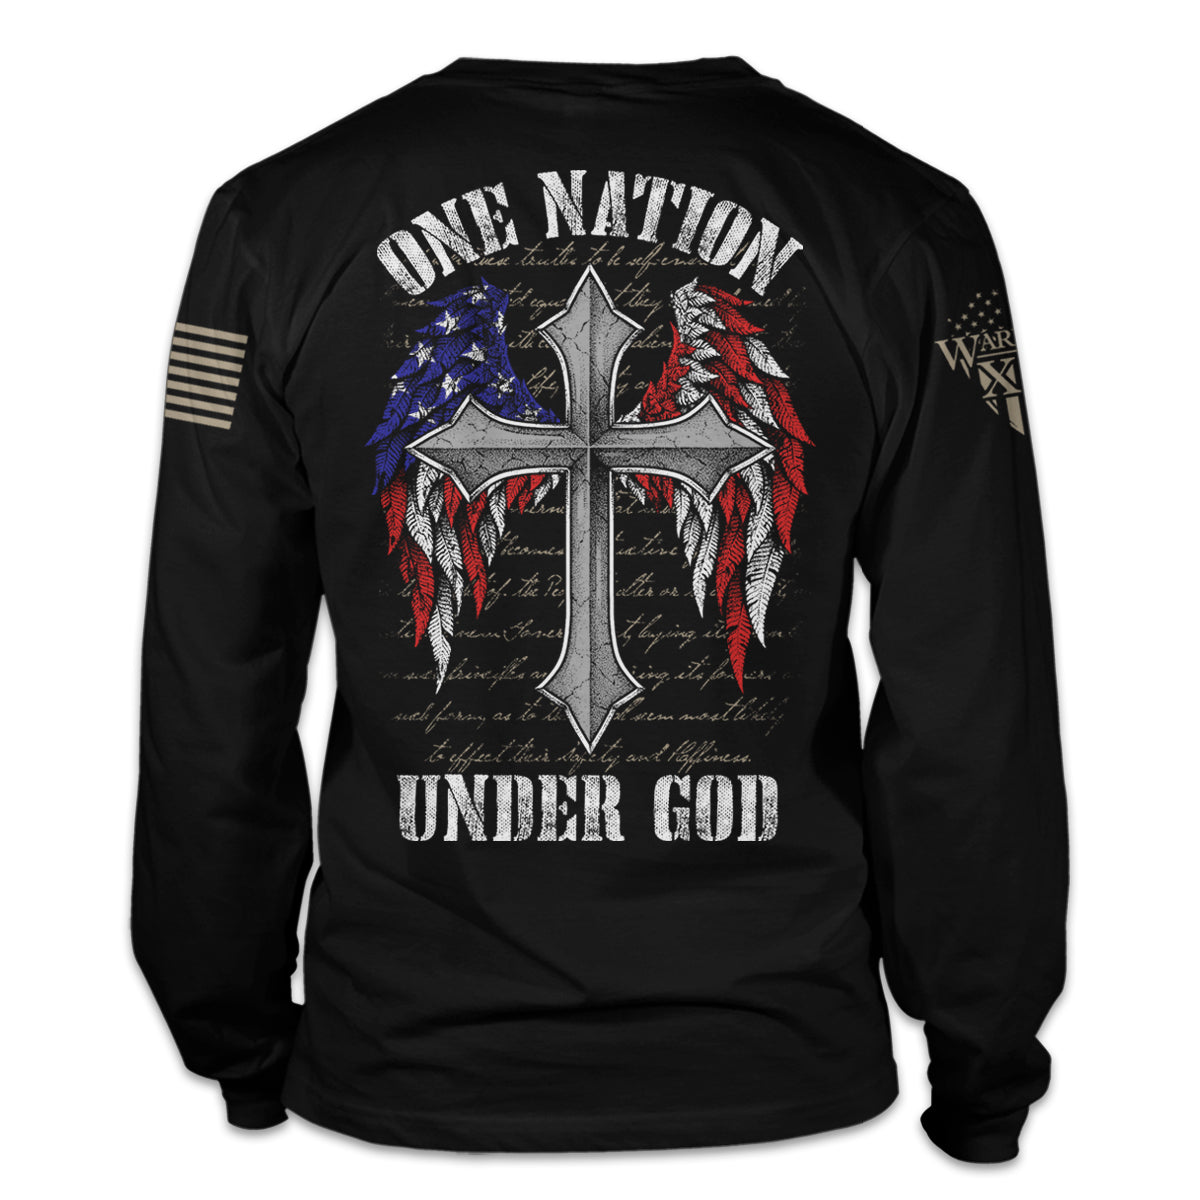 A black long sleeve shirt with the words " one nation under God" with a cross with USA Flag wings printed on the back of the shirt.